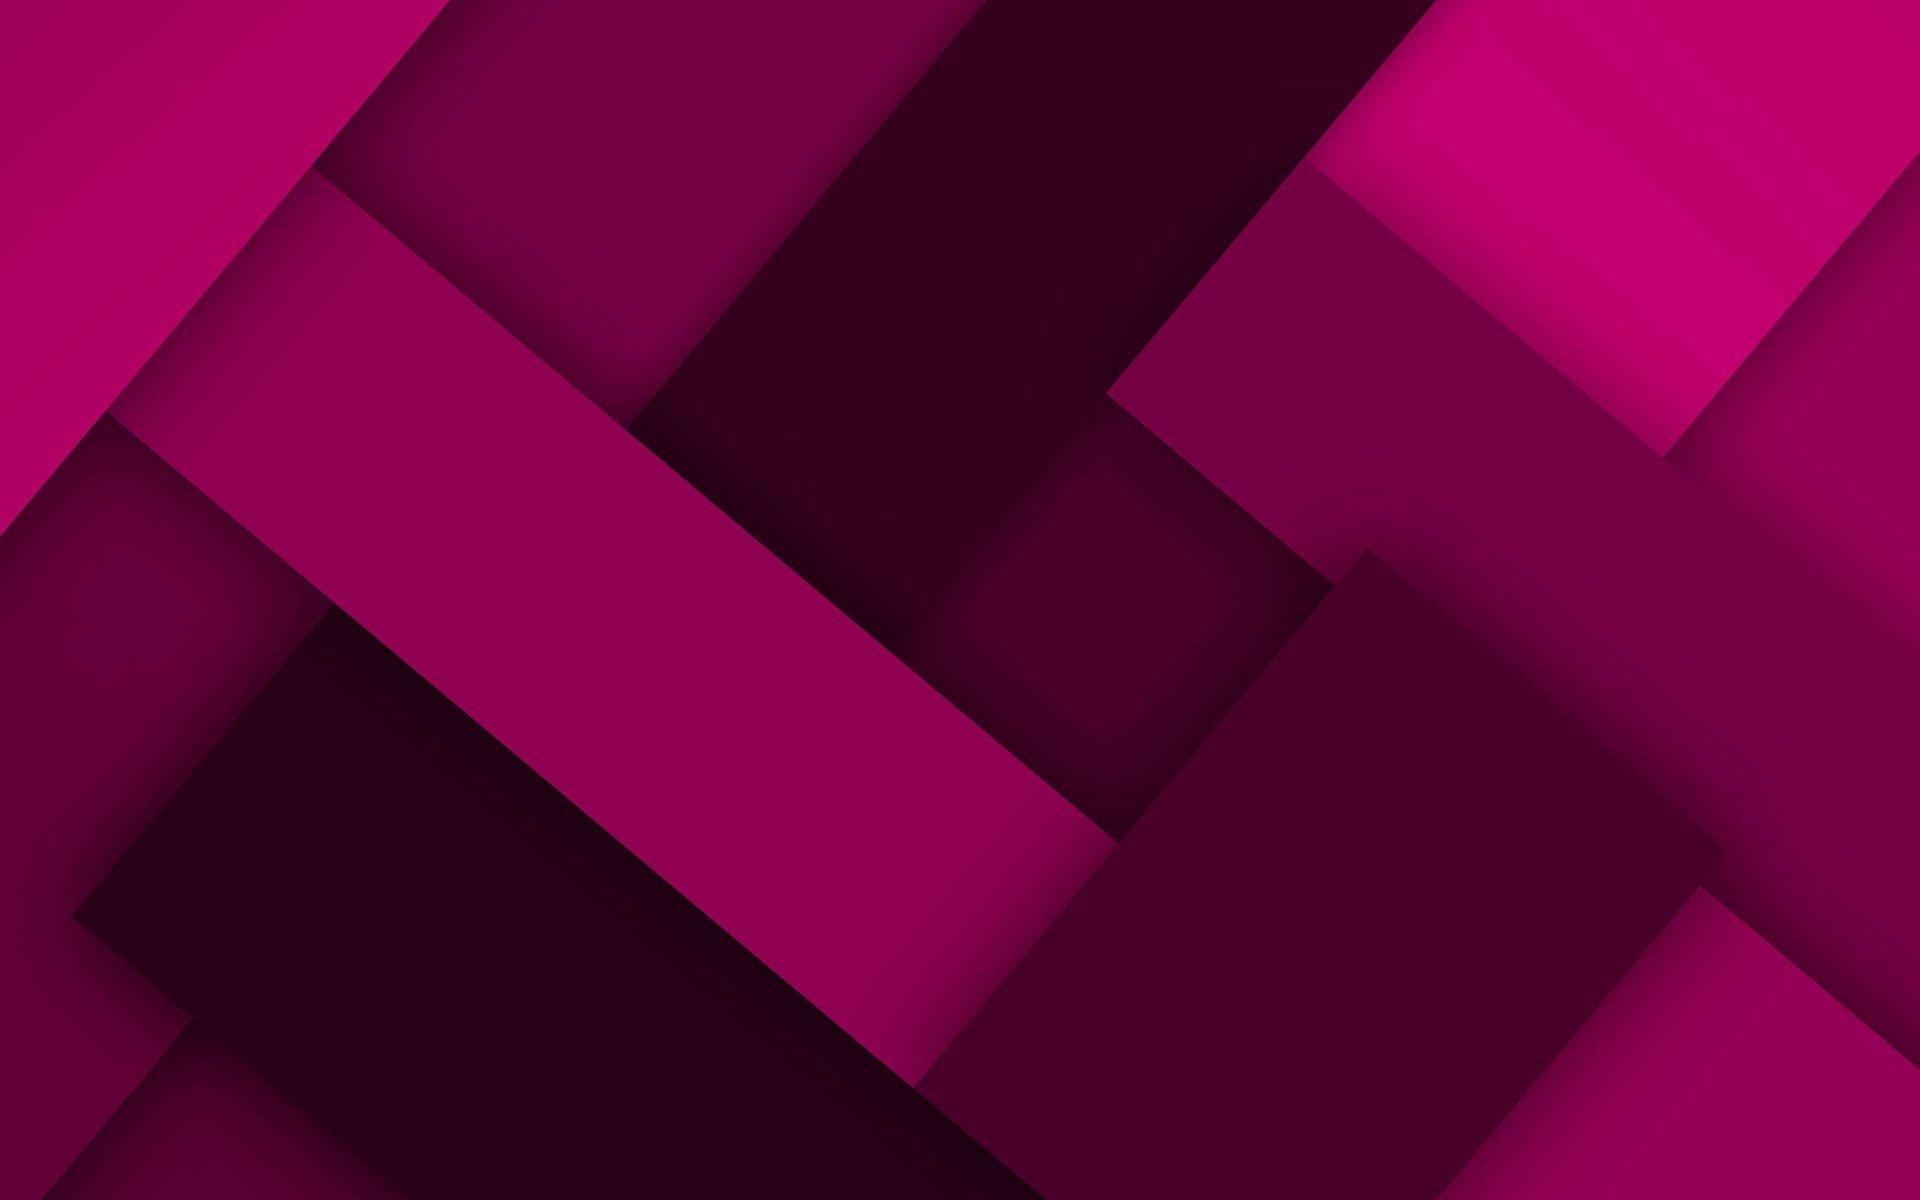 A purple abstract wallpaper with geometric shapes - Magenta